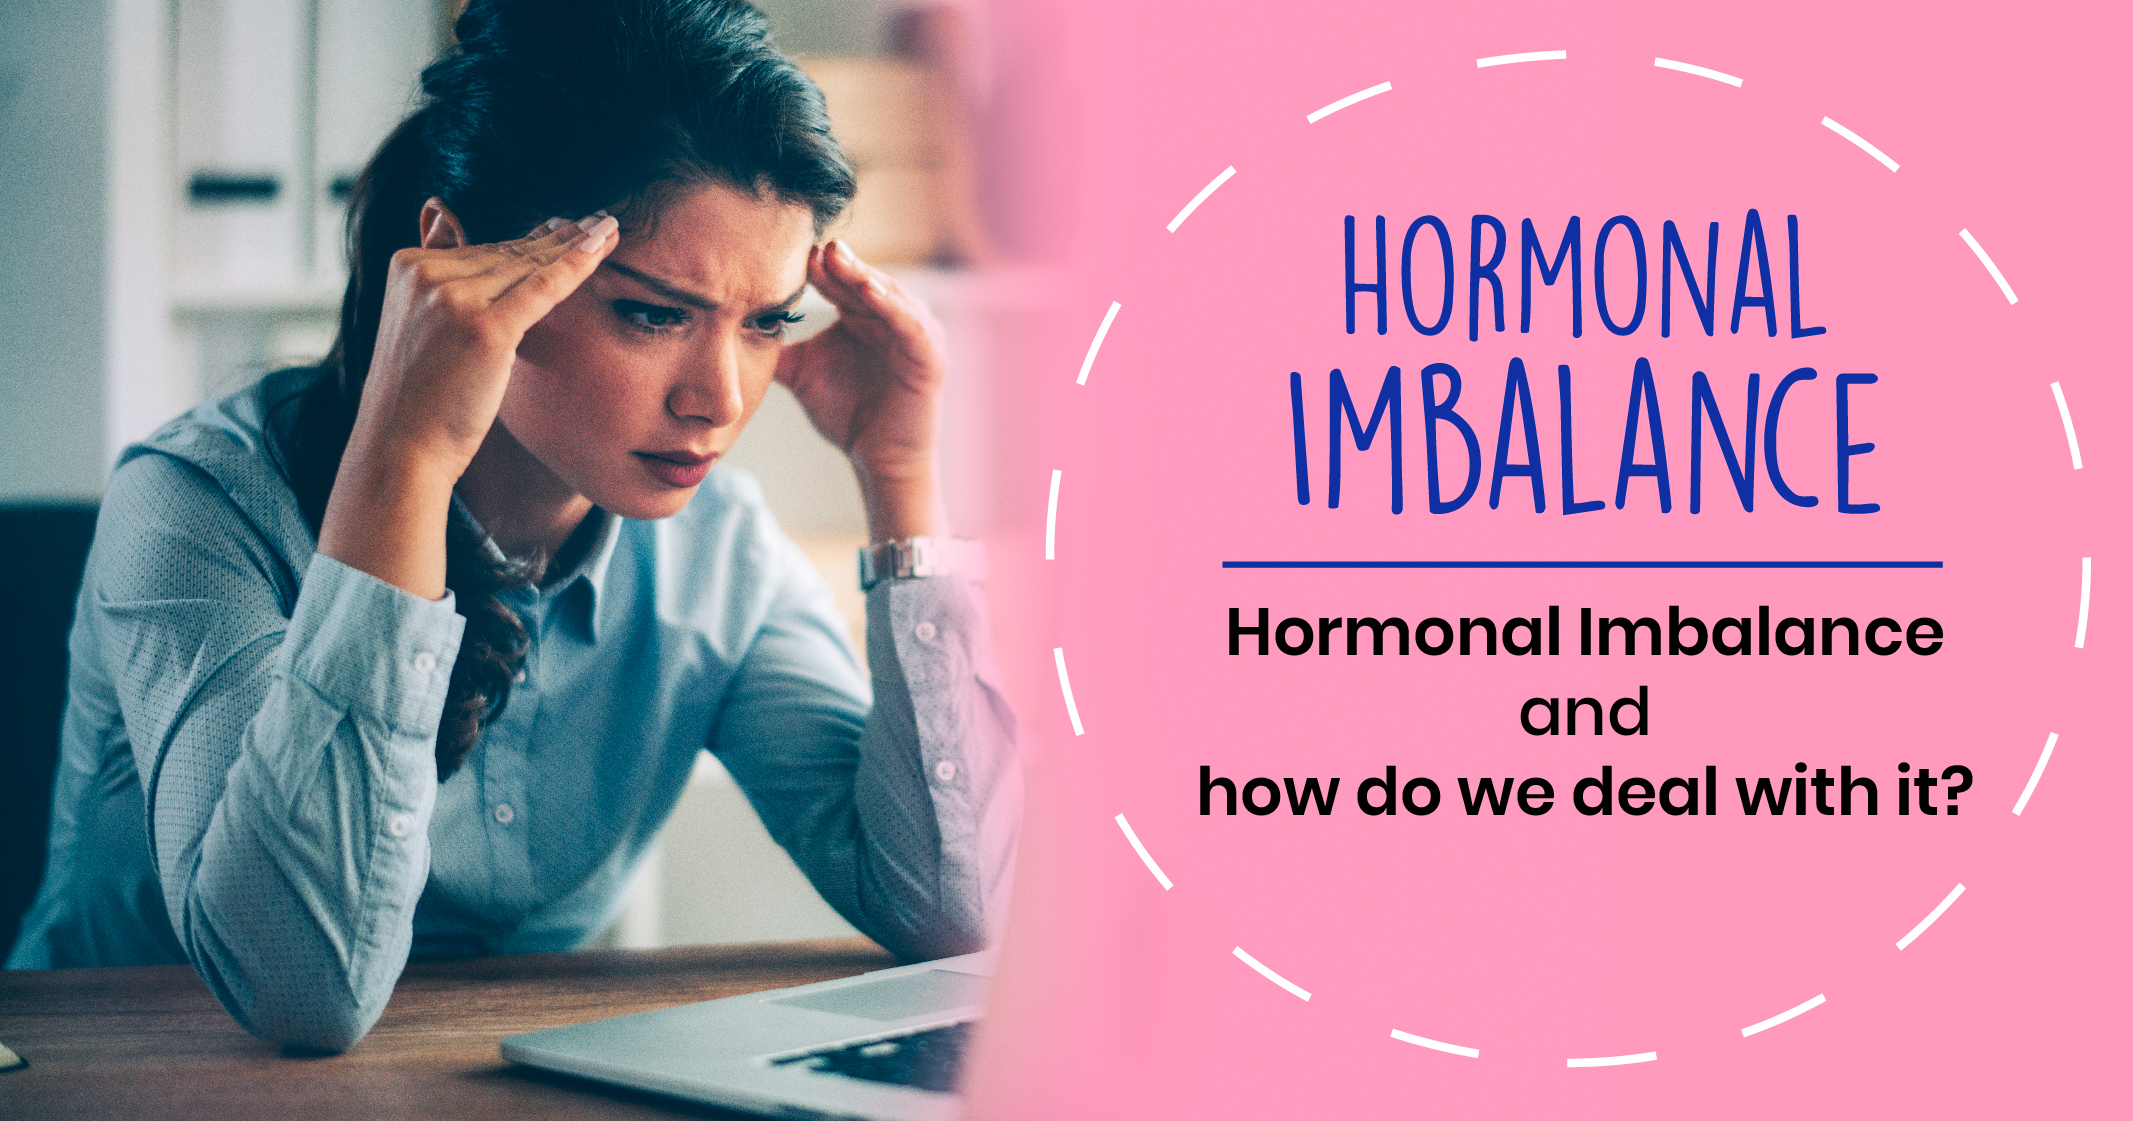 Hormonal Imbalance in Females - Symptoms, Causes and Treatment - Star ...